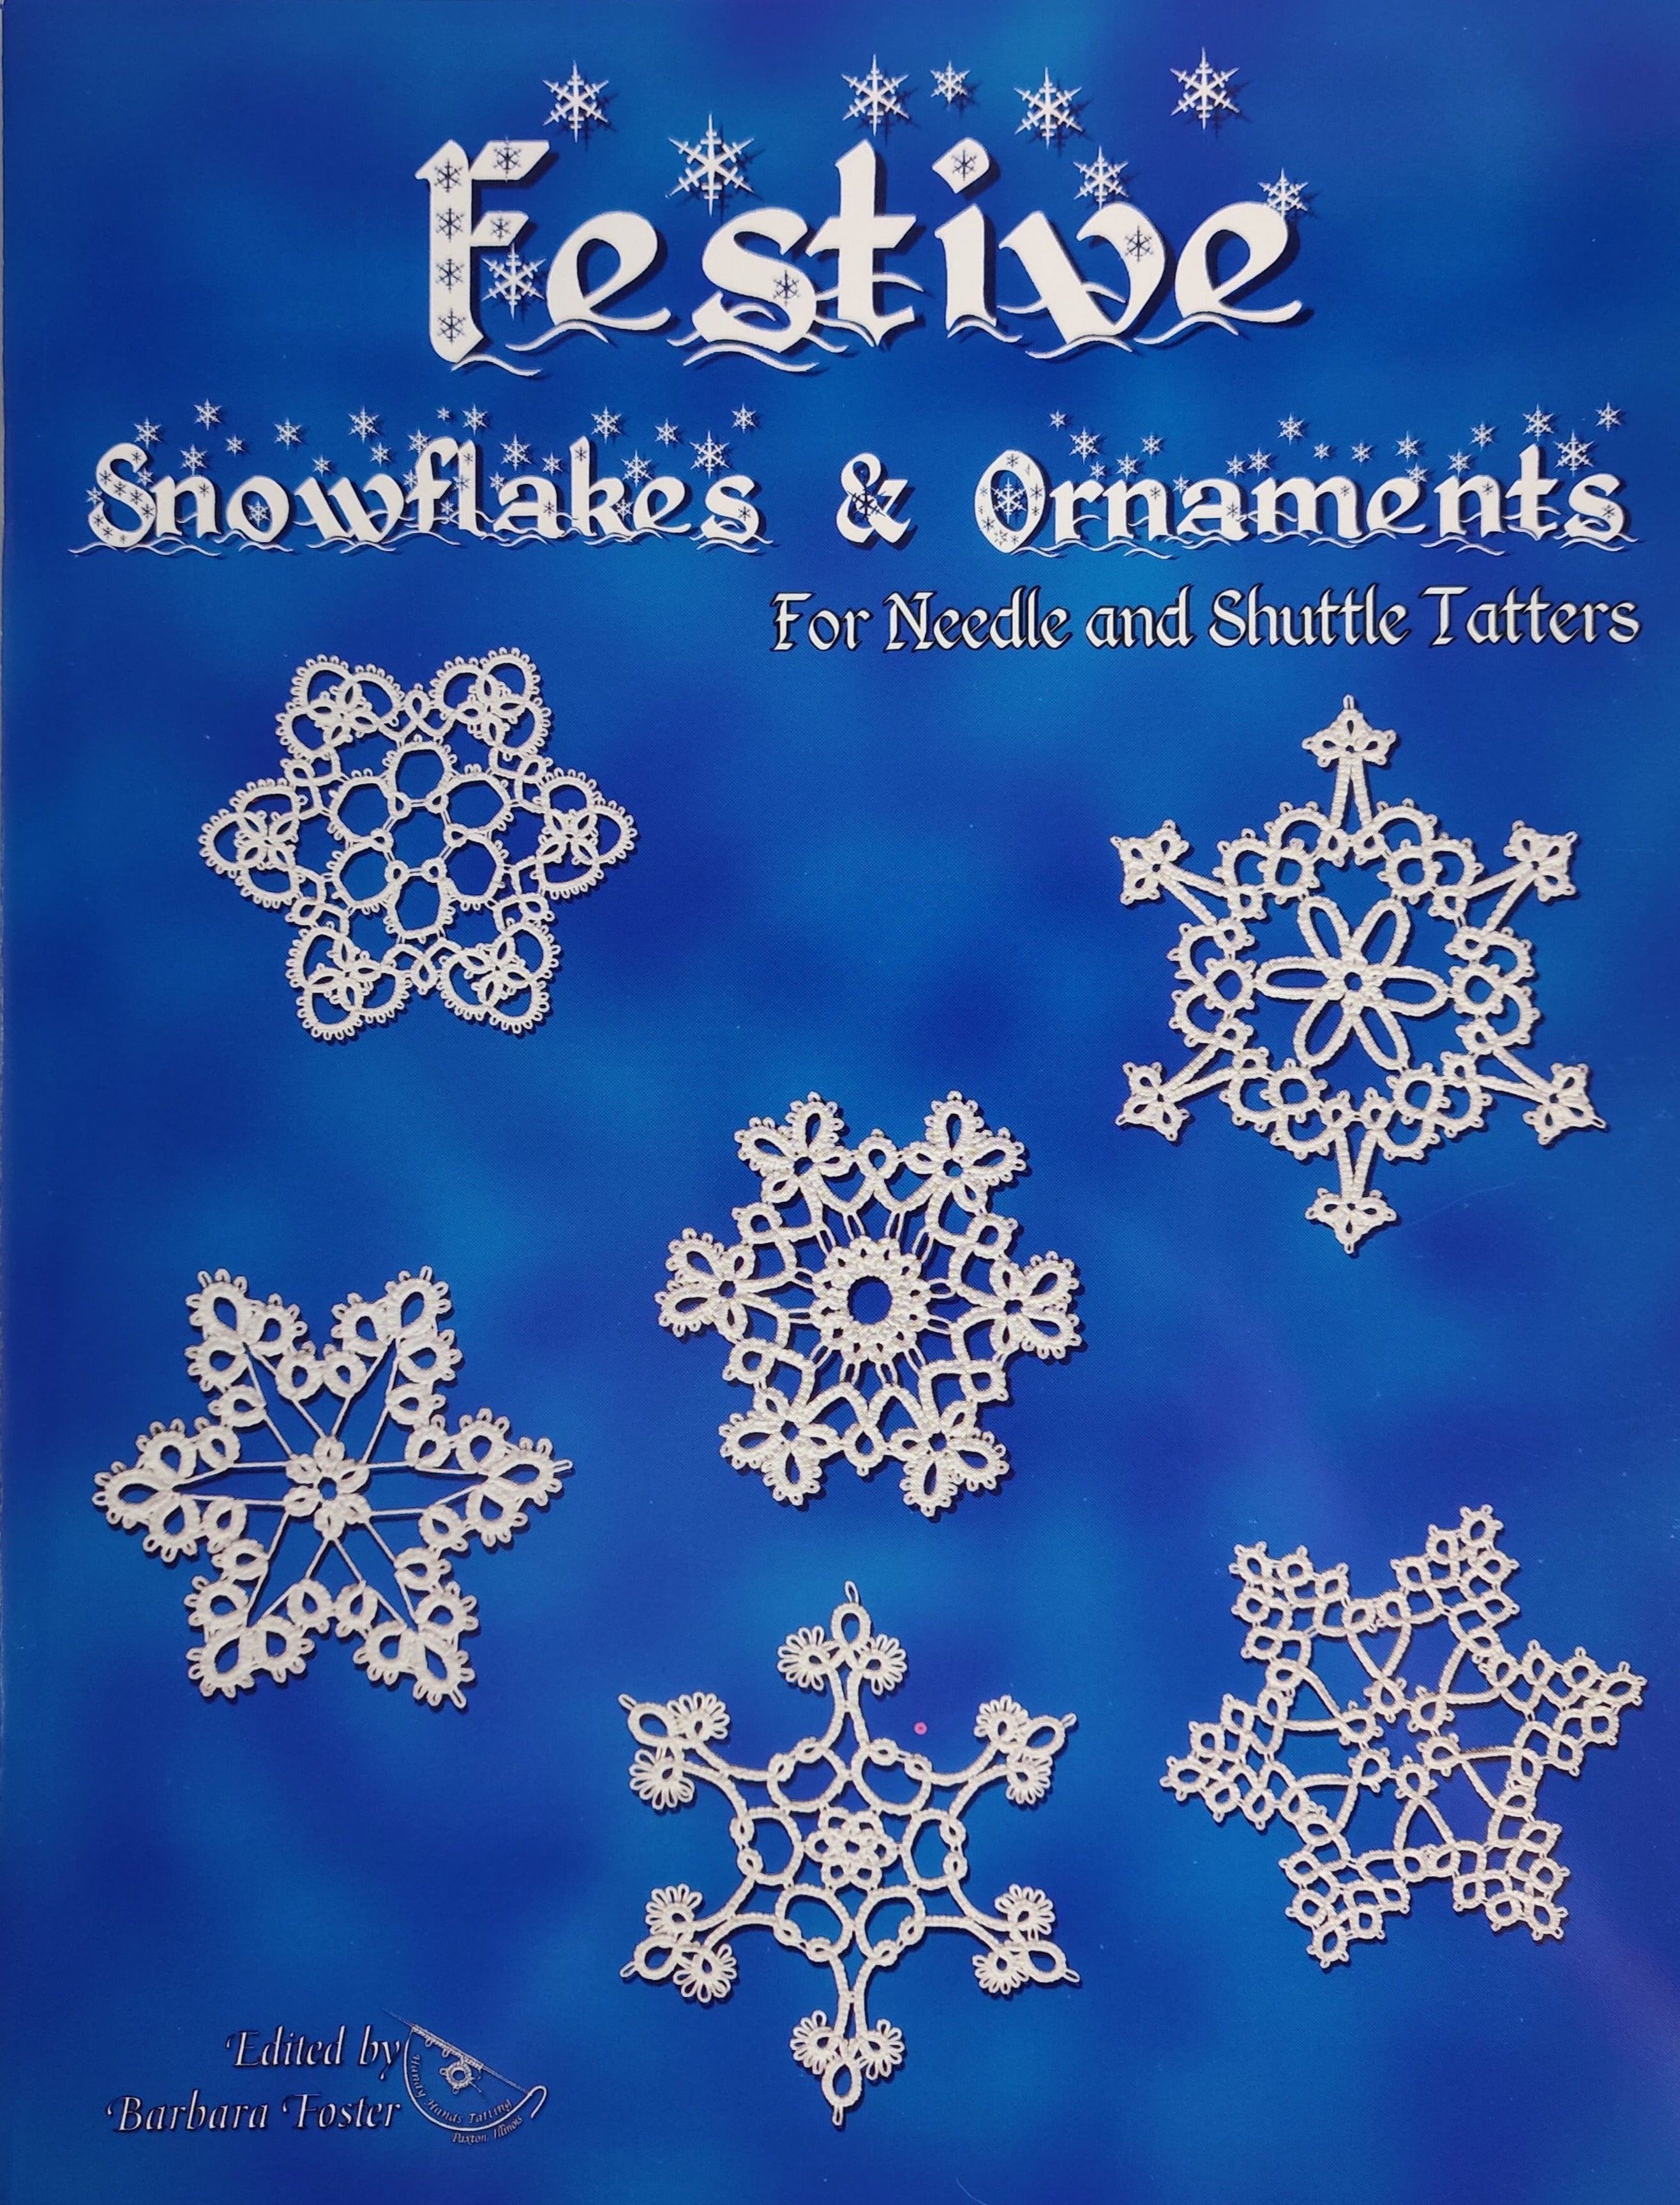 Festive snowflakes and ornaments